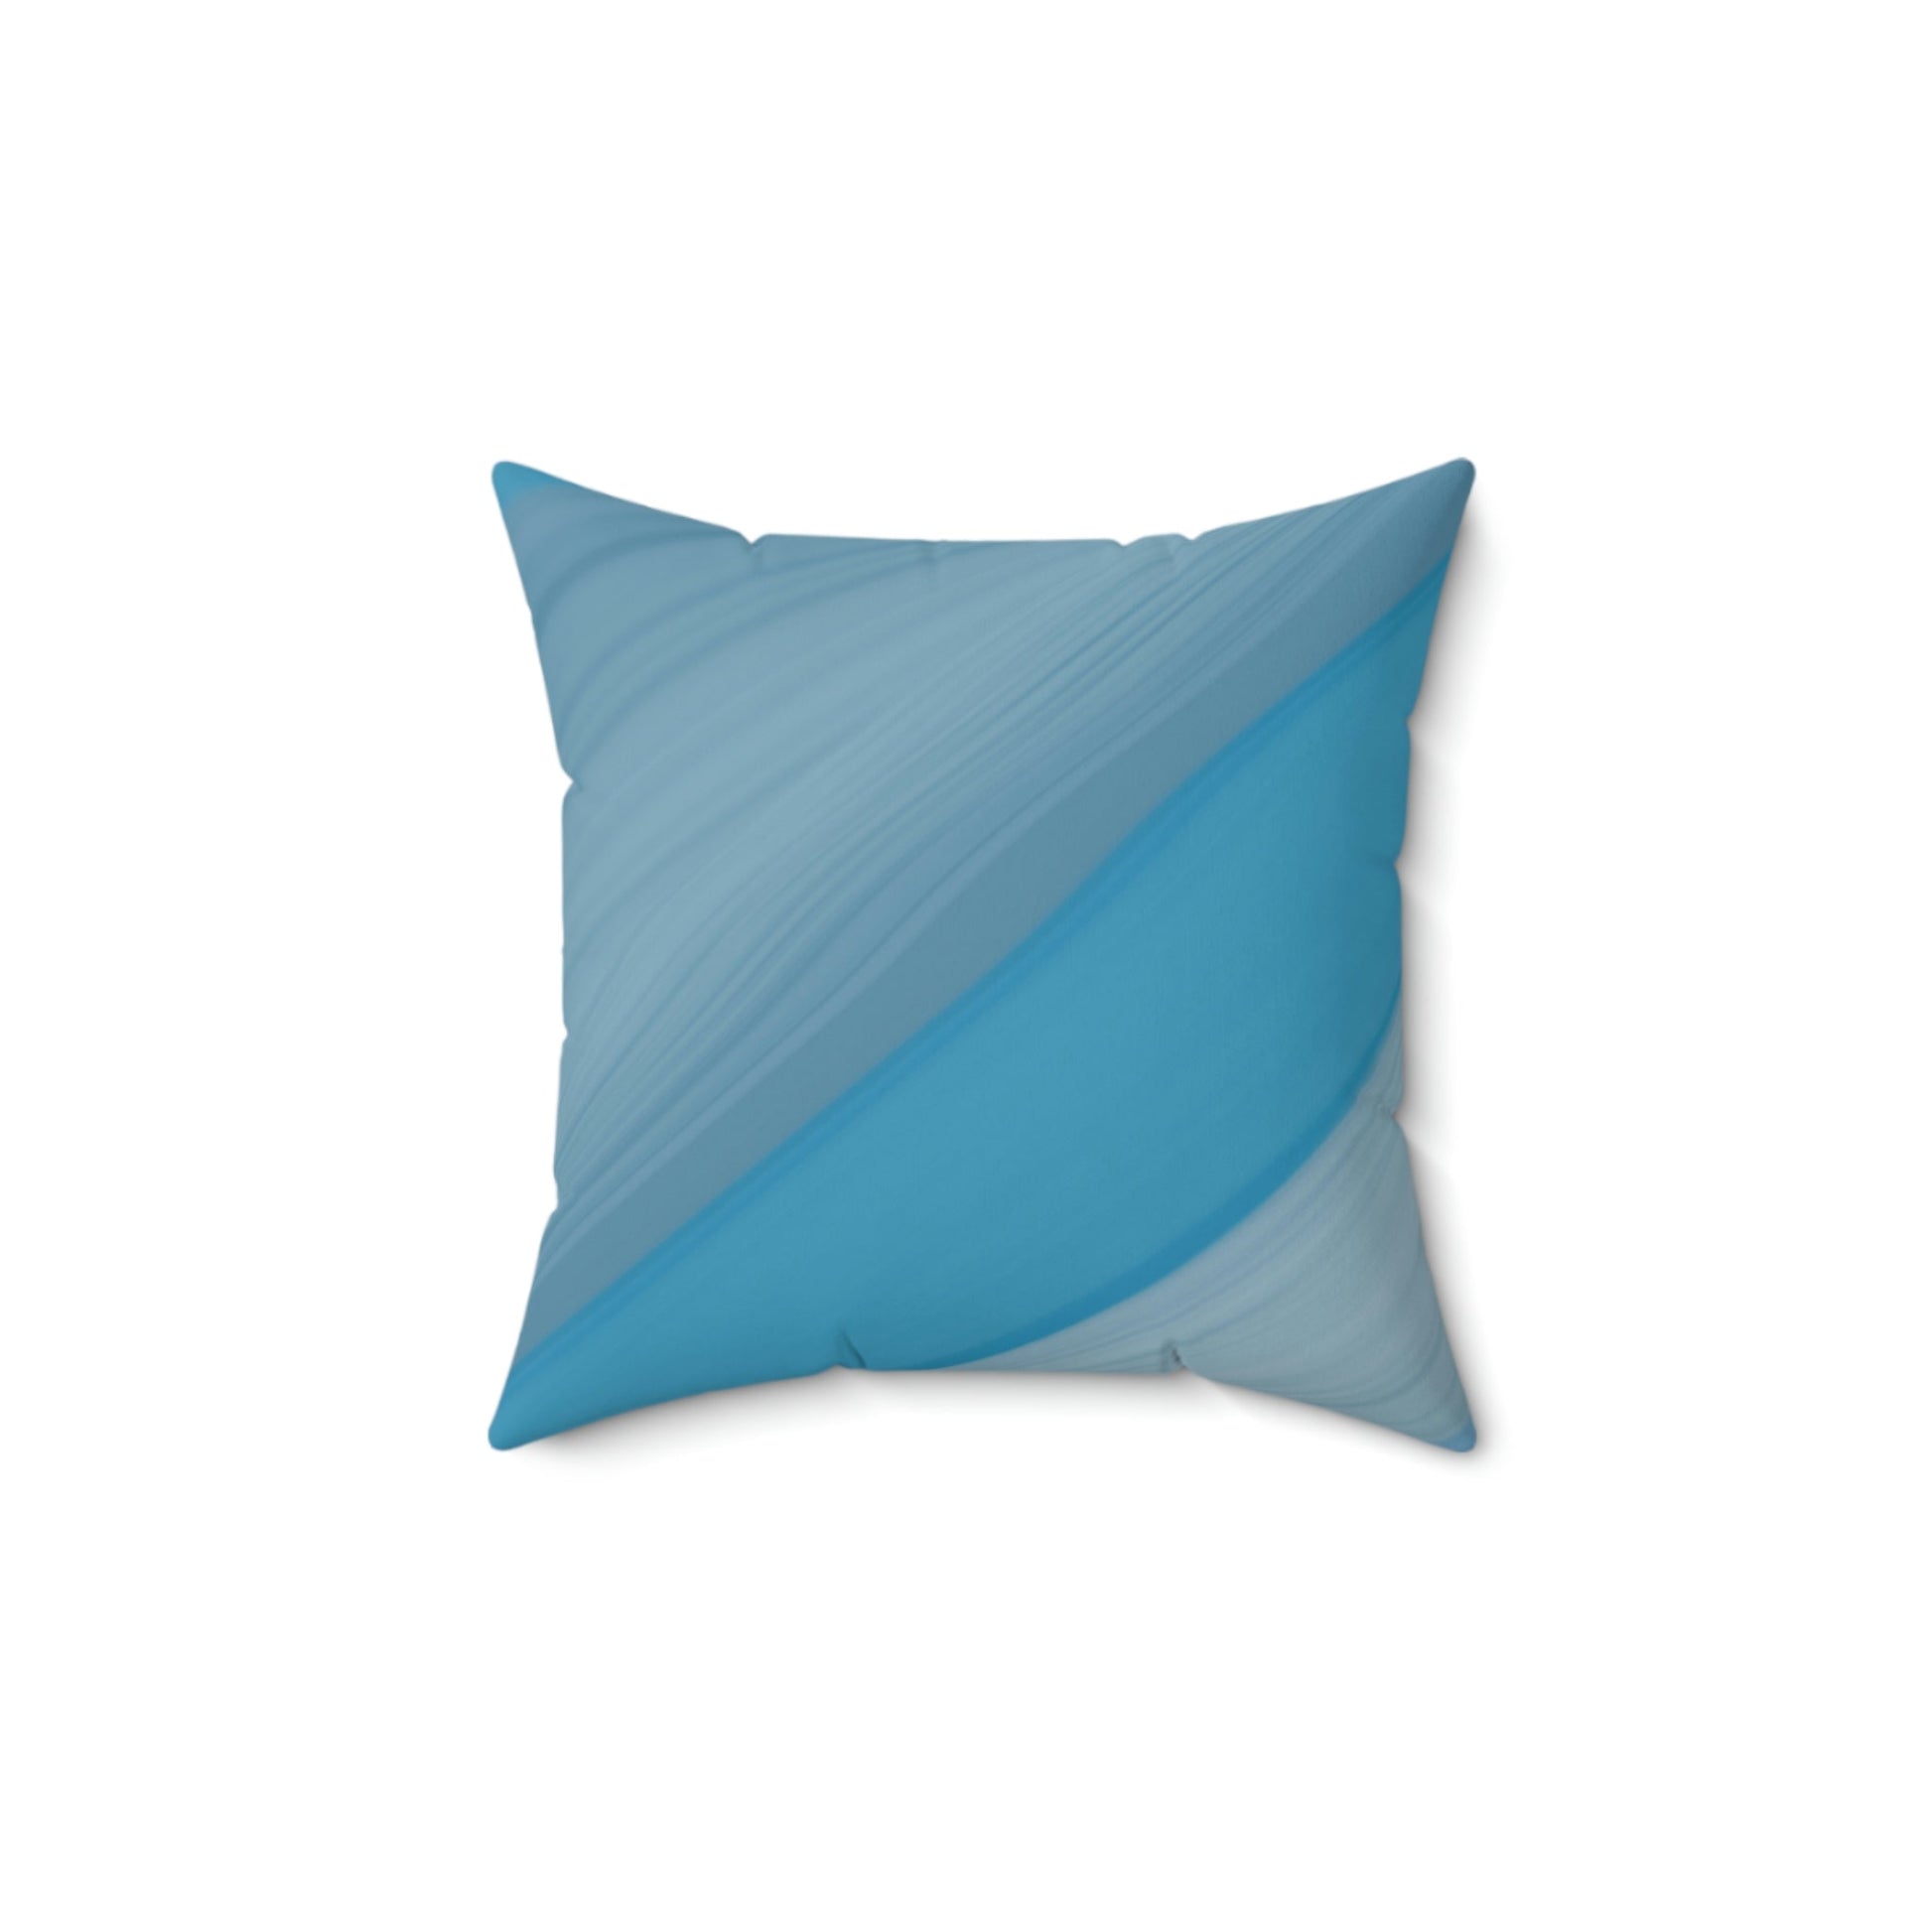 Feeling So Blue Square Pillow Home Decor Pink Sweetheart